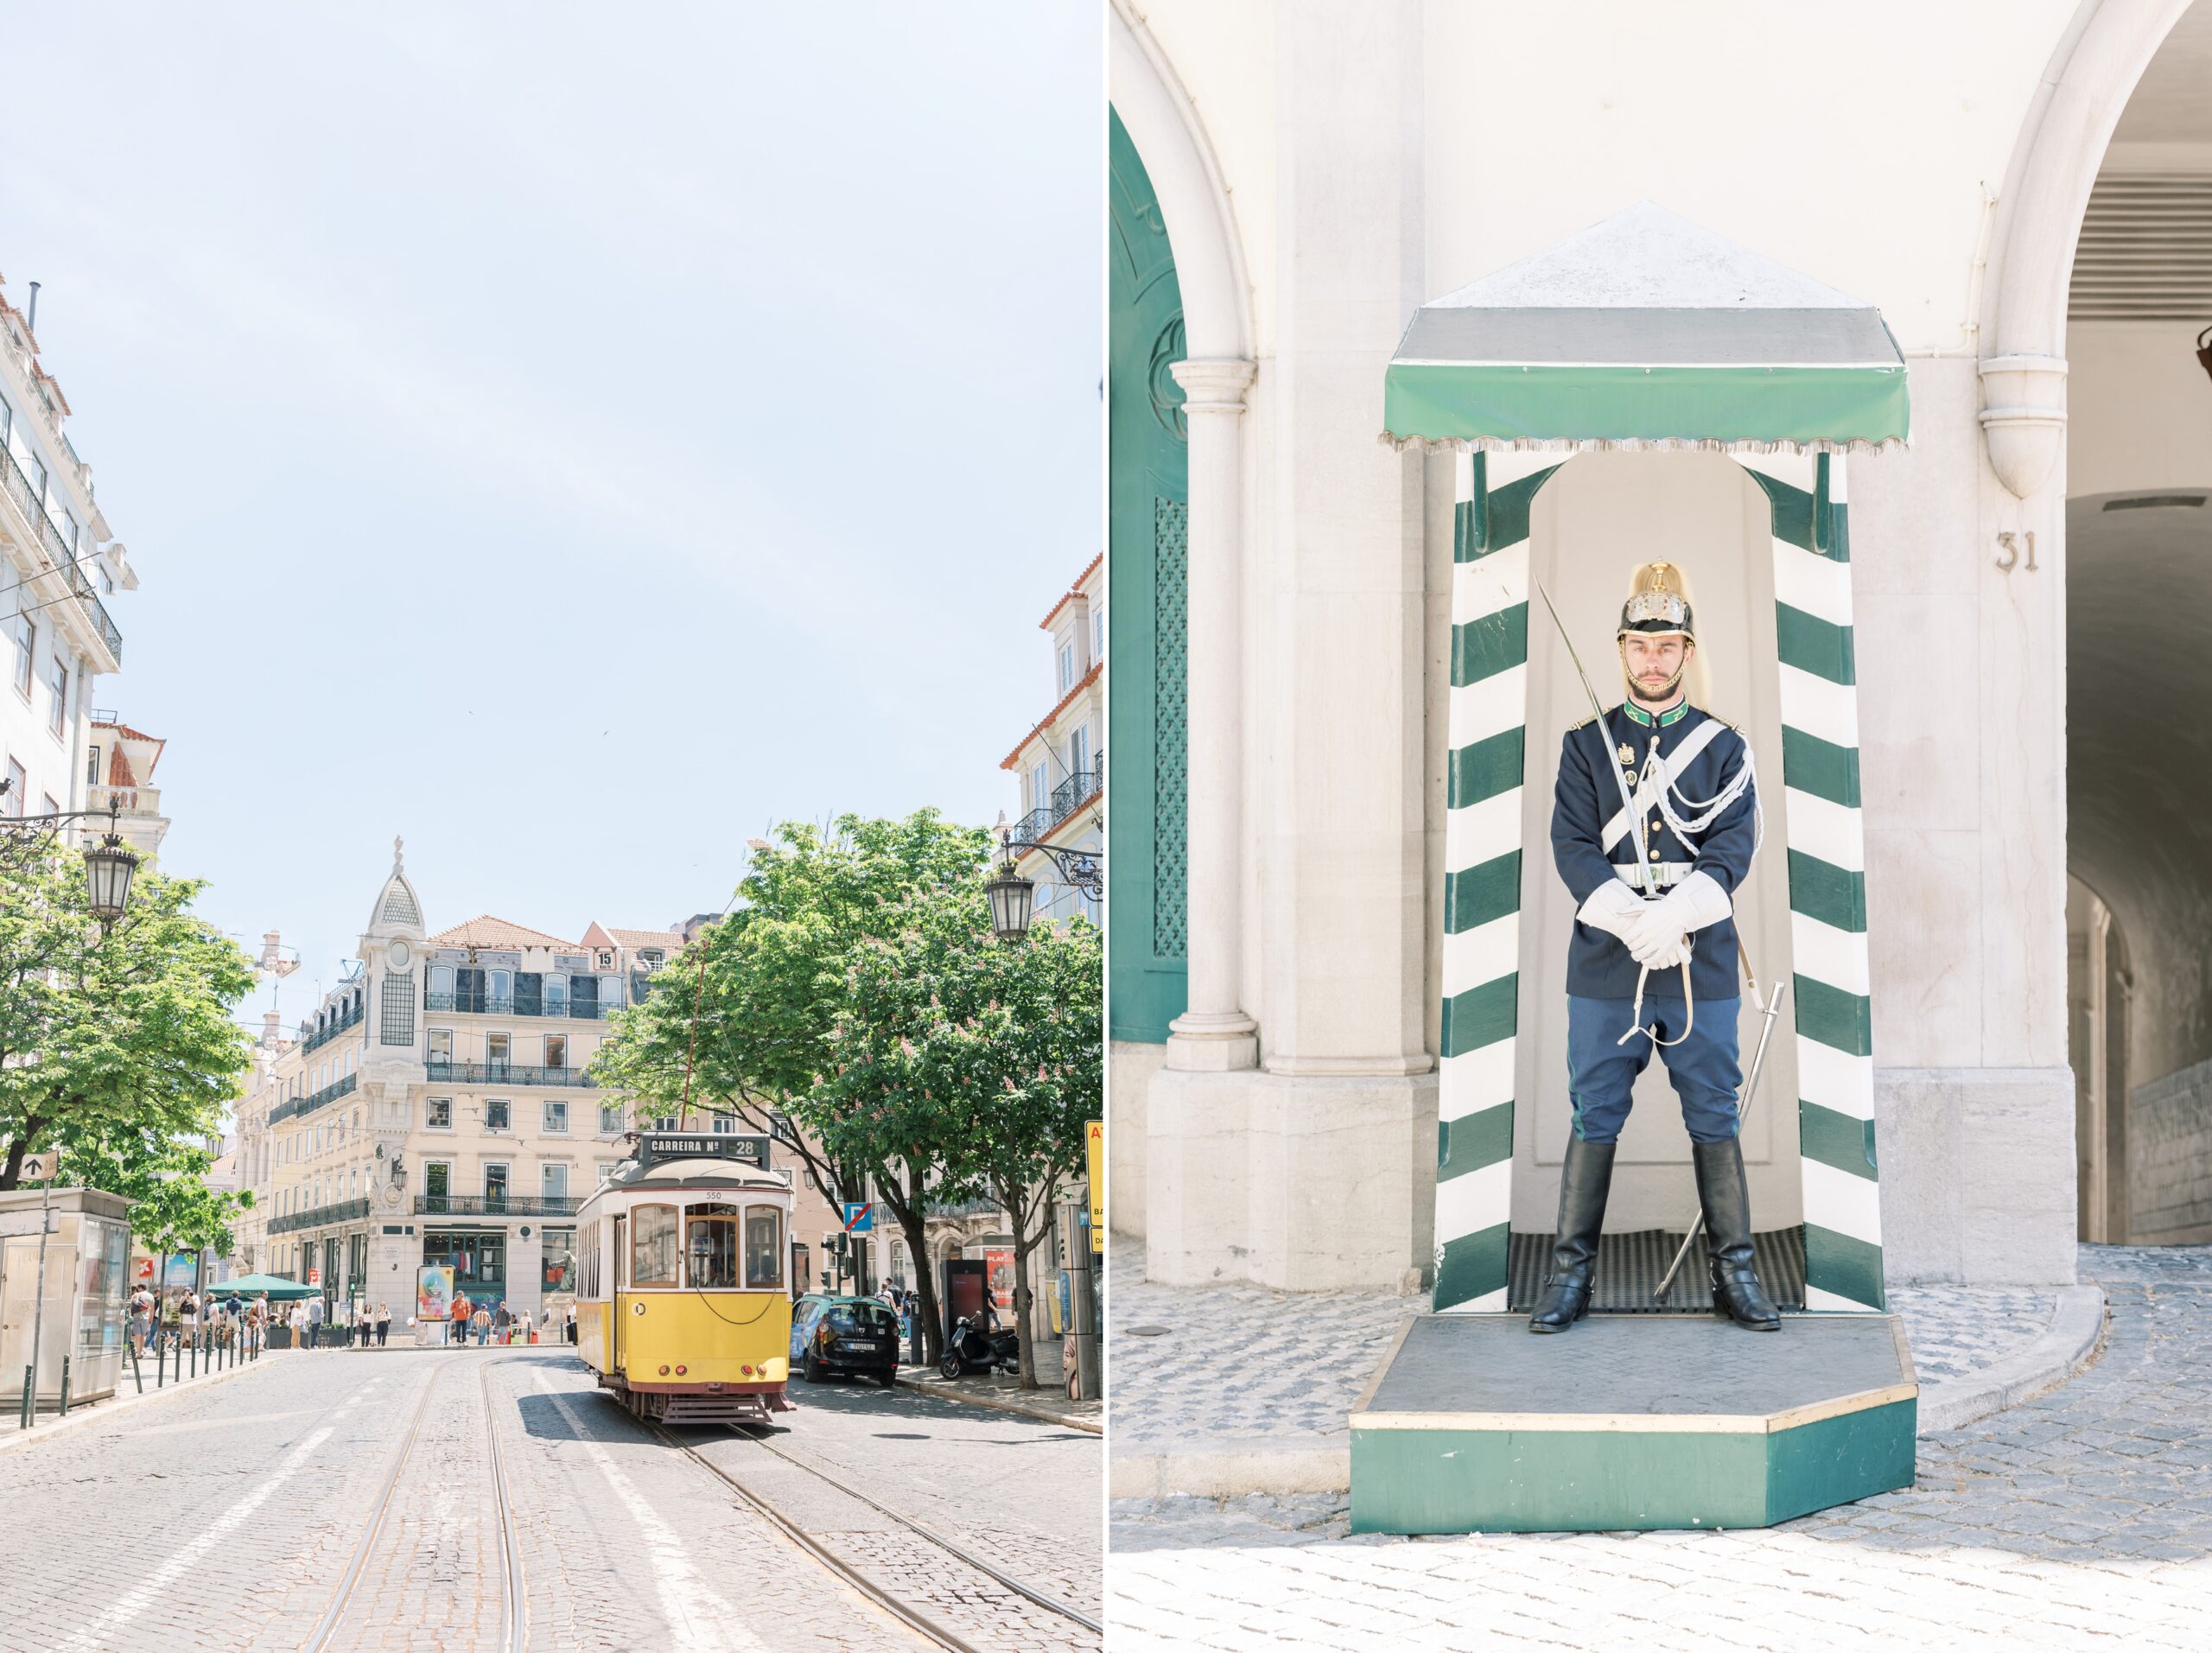 A travel vacation guide to Lisbon, Sintra, and the Algarve region of Portugal, along with a day trip to Seville!